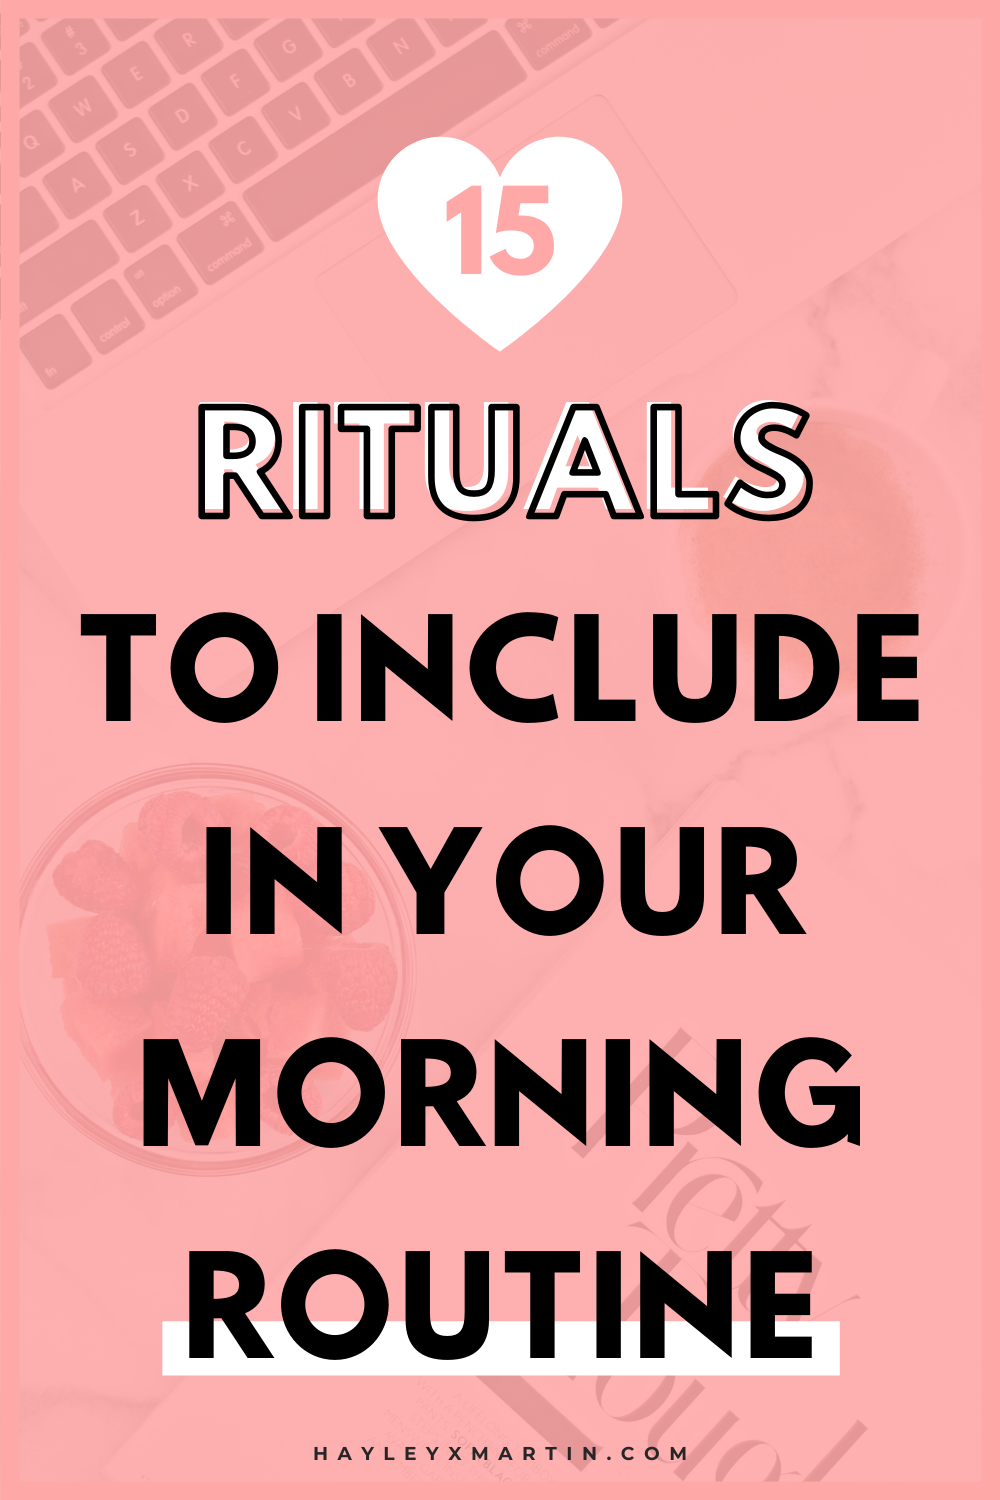 15 RITUALS TO INCLUDE IN YOUR MORNING ROUTINE | HAYLEYXMARTIN